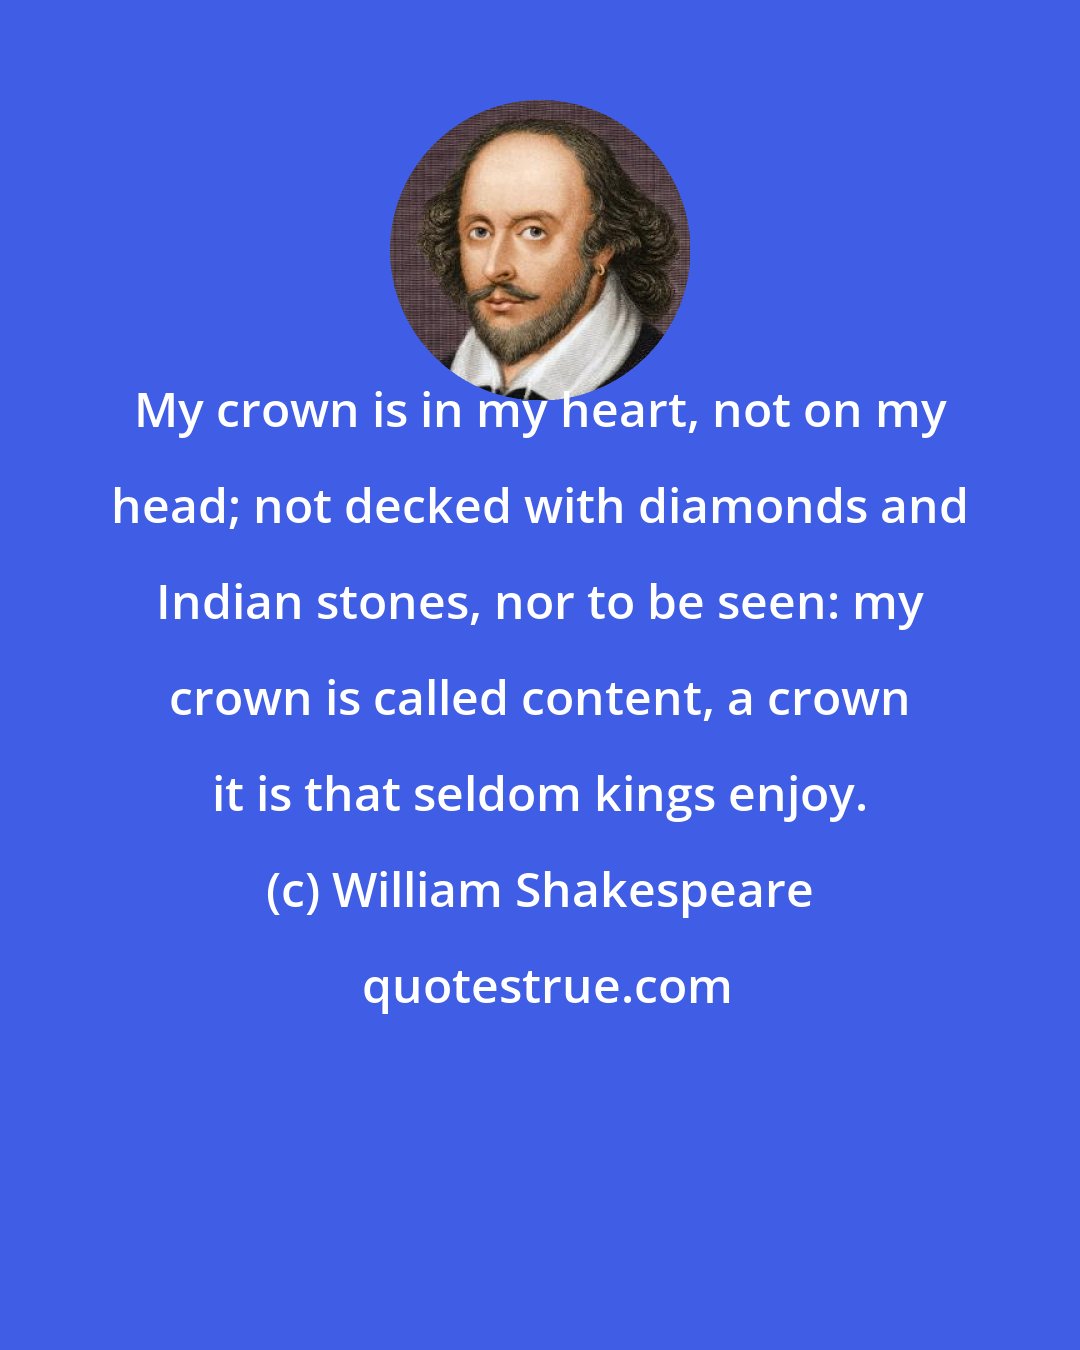 William Shakespeare: My crown is in my heart, not on my head; not decked with diamonds and Indian stones, nor to be seen: my crown is called content, a crown it is that seldom kings enjoy.